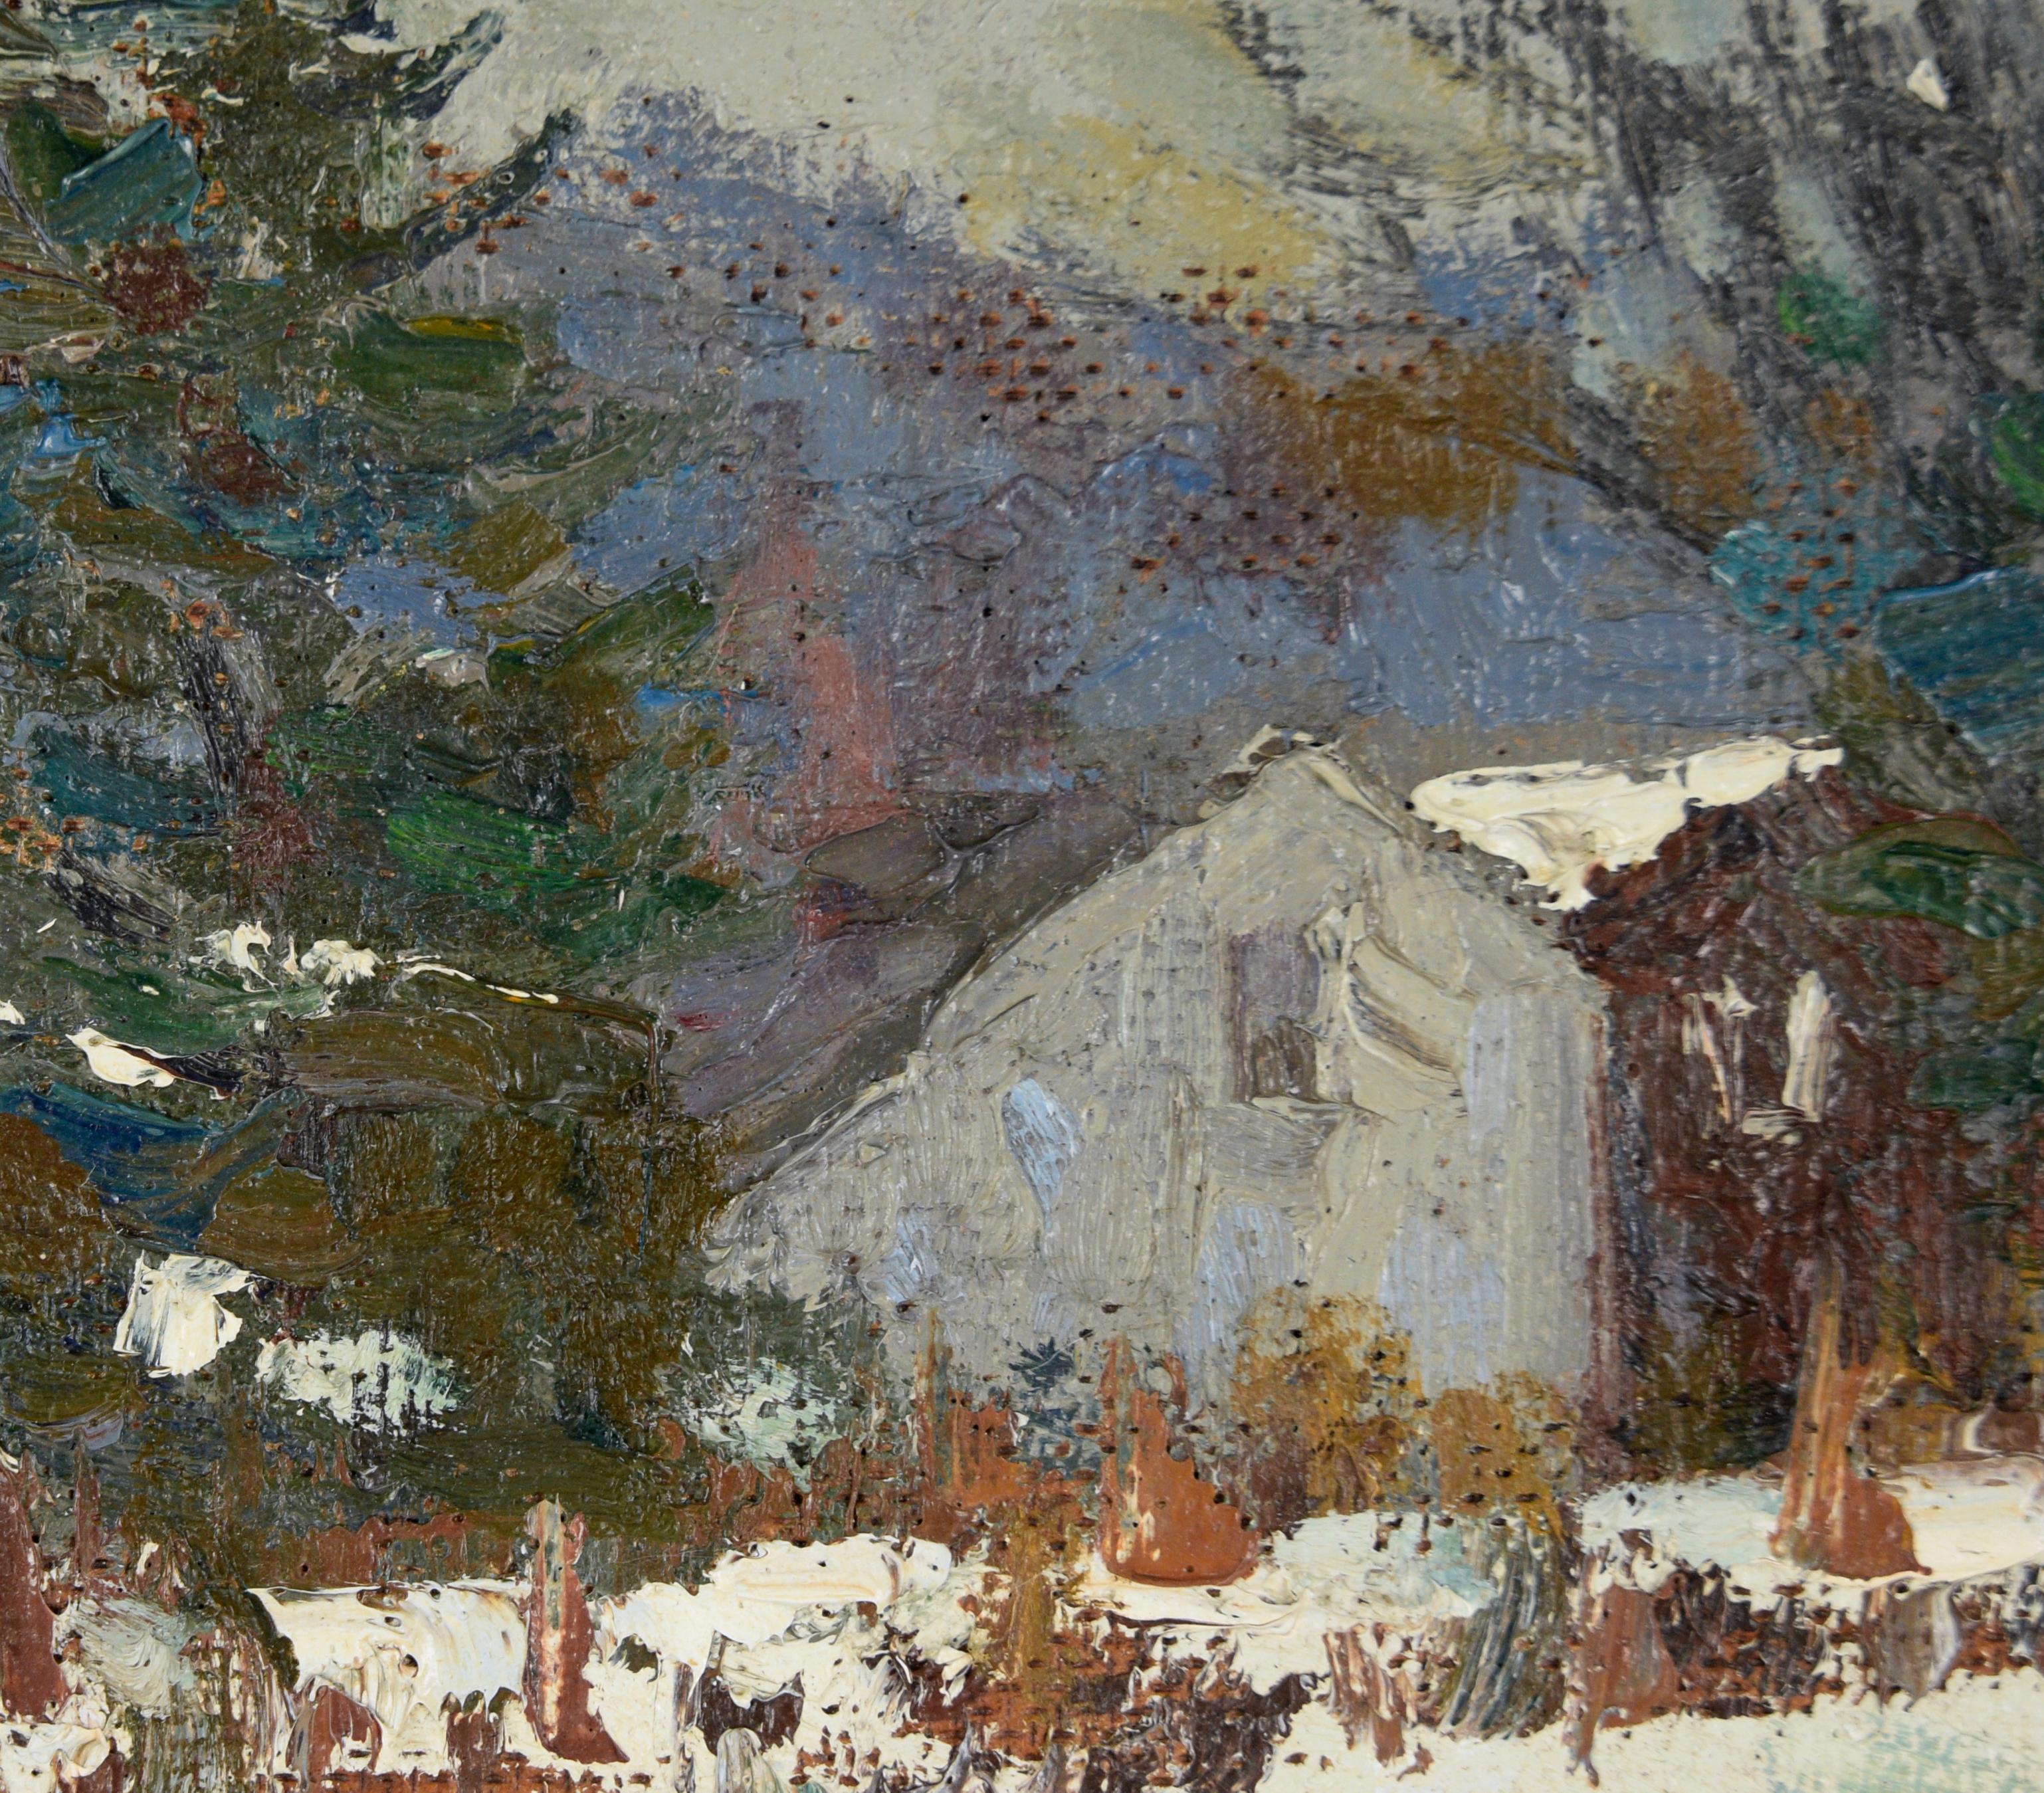 Cabin in the Snowy Forest - Connecticut Winter Landscape in Oil on Masonite - American Impressionist Painting by Bernard Lennon